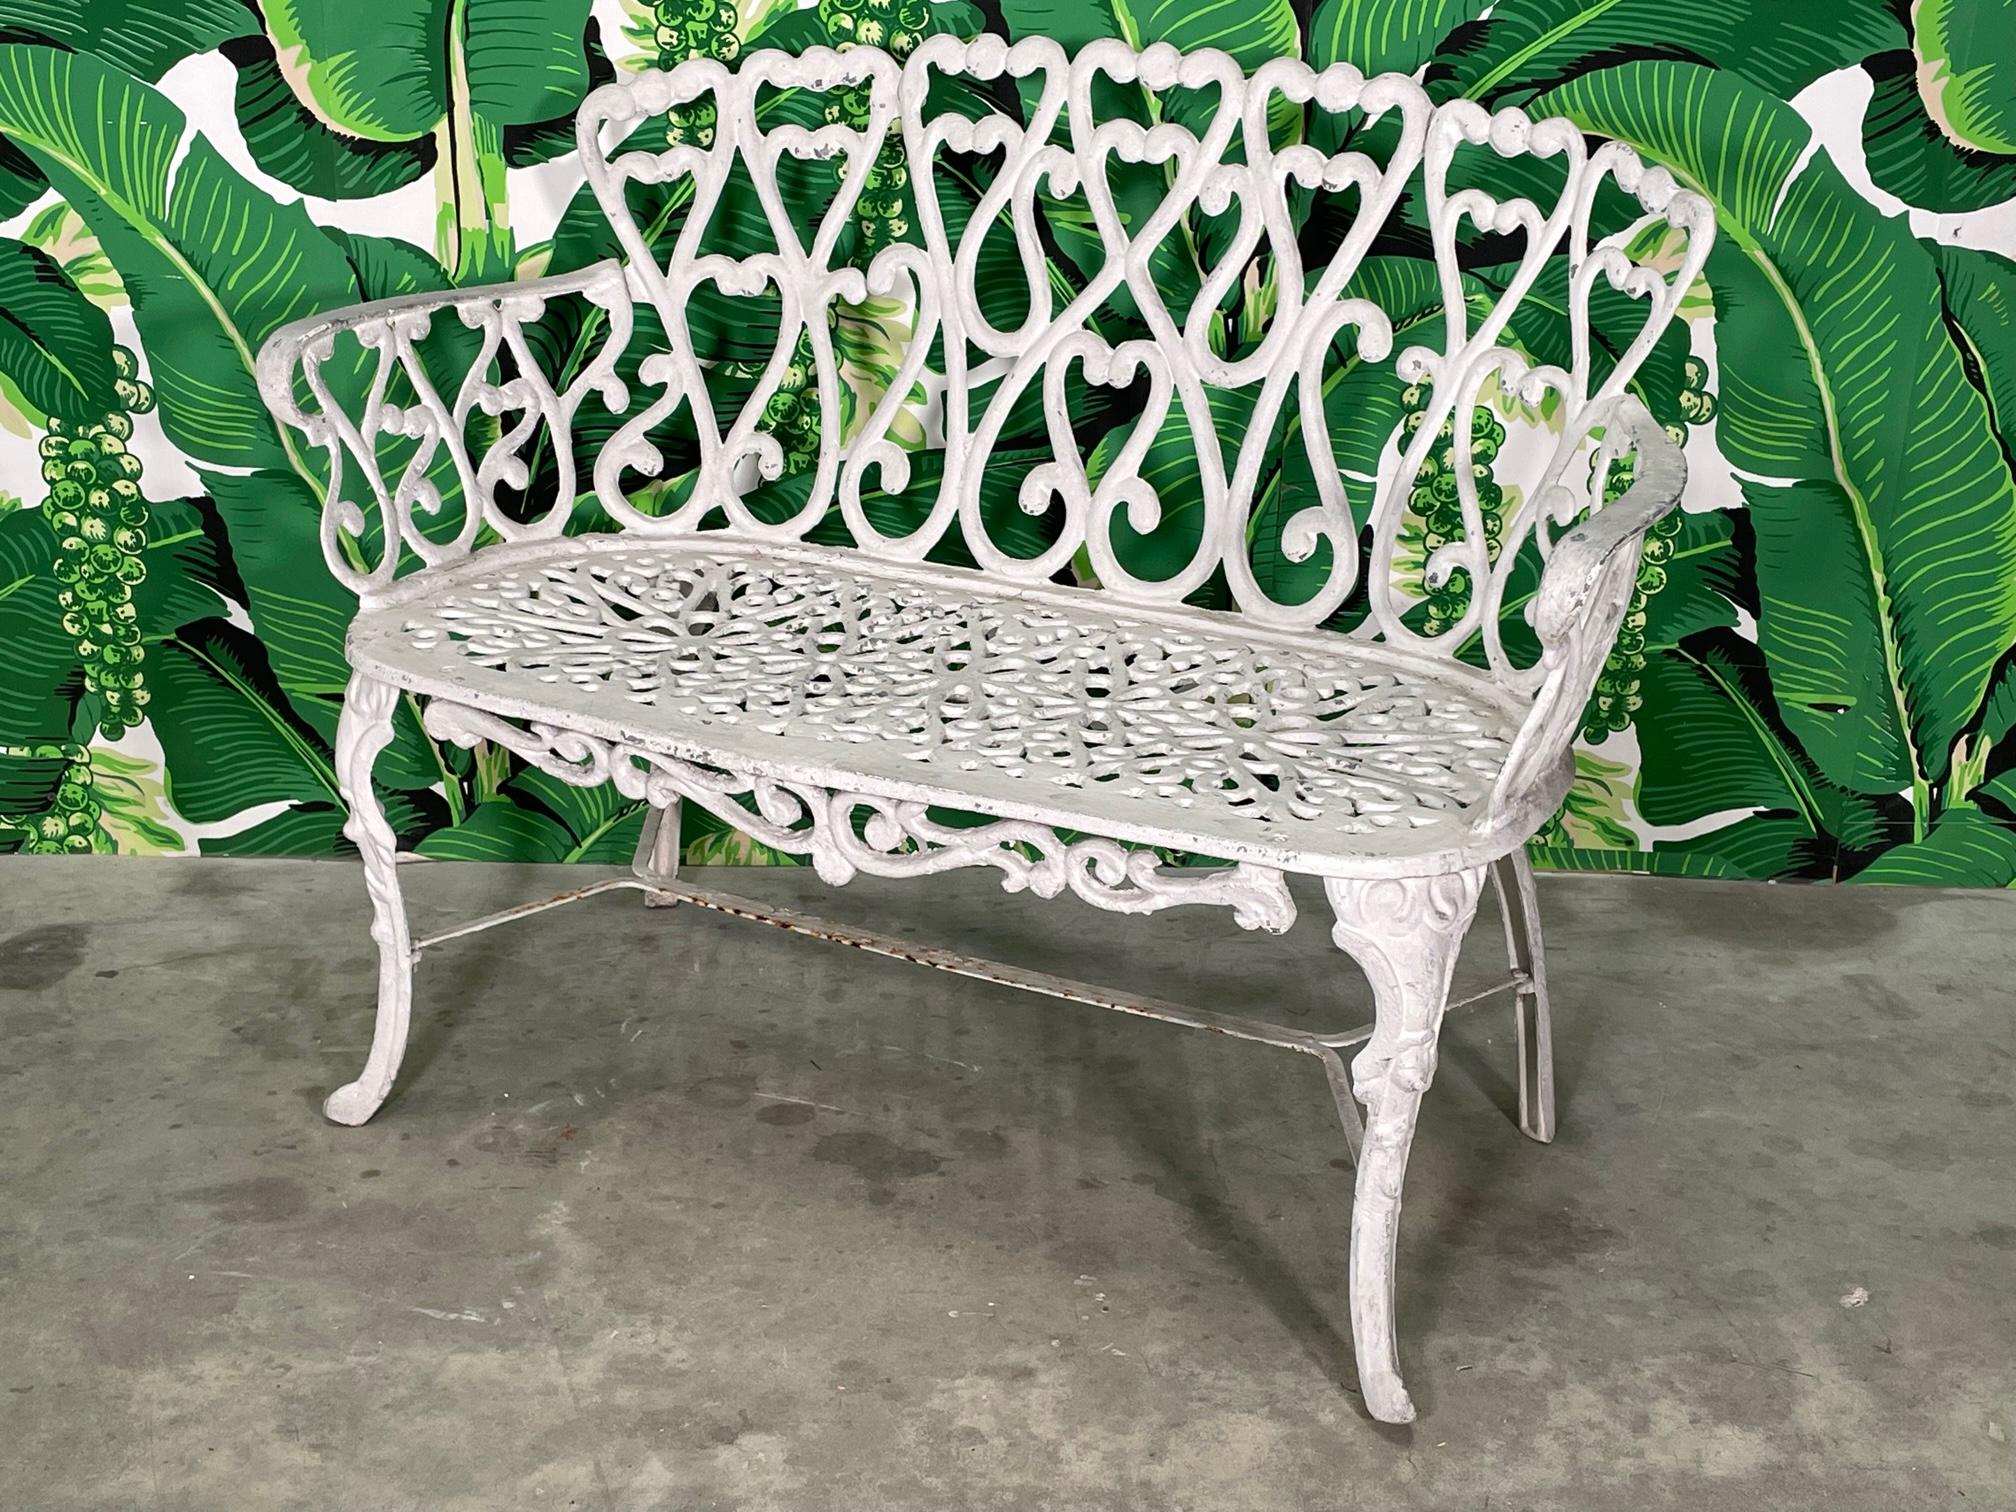 Cast aluminum garden/patio bench in the manner of Frances Elkins. Loveseat or small sofa. Heavy construction, assuming aluminum but possibly iron. Structurally sound with imperfections to the finish (see photos). Seat height measures 16